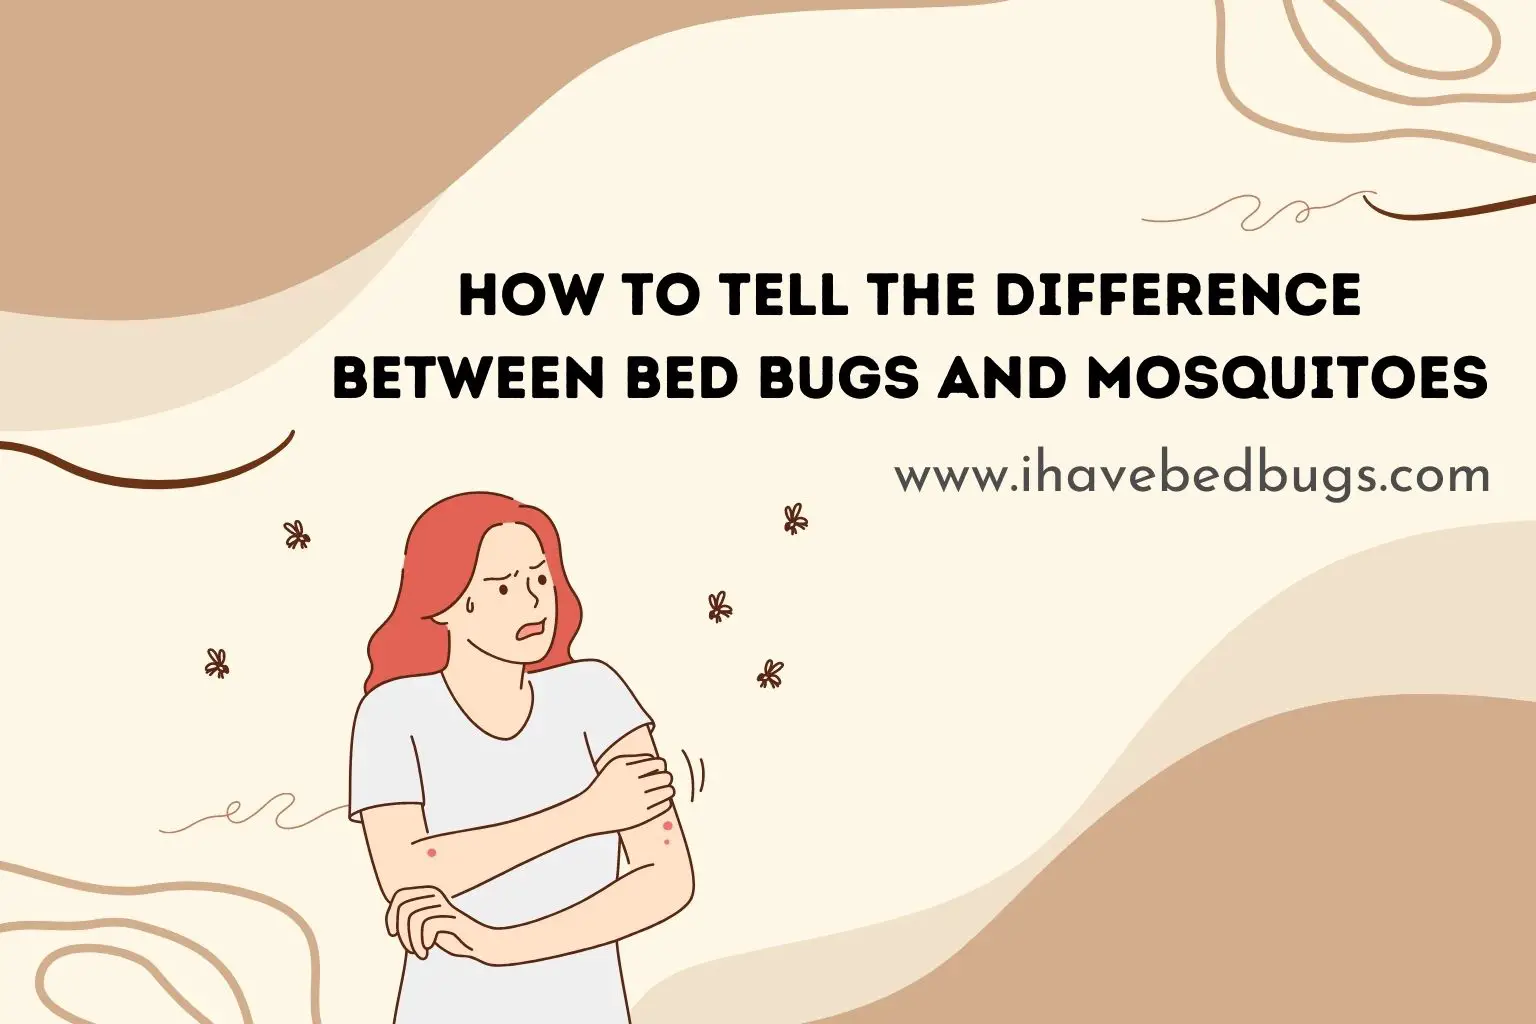 Mosquitoes vs bed bugs